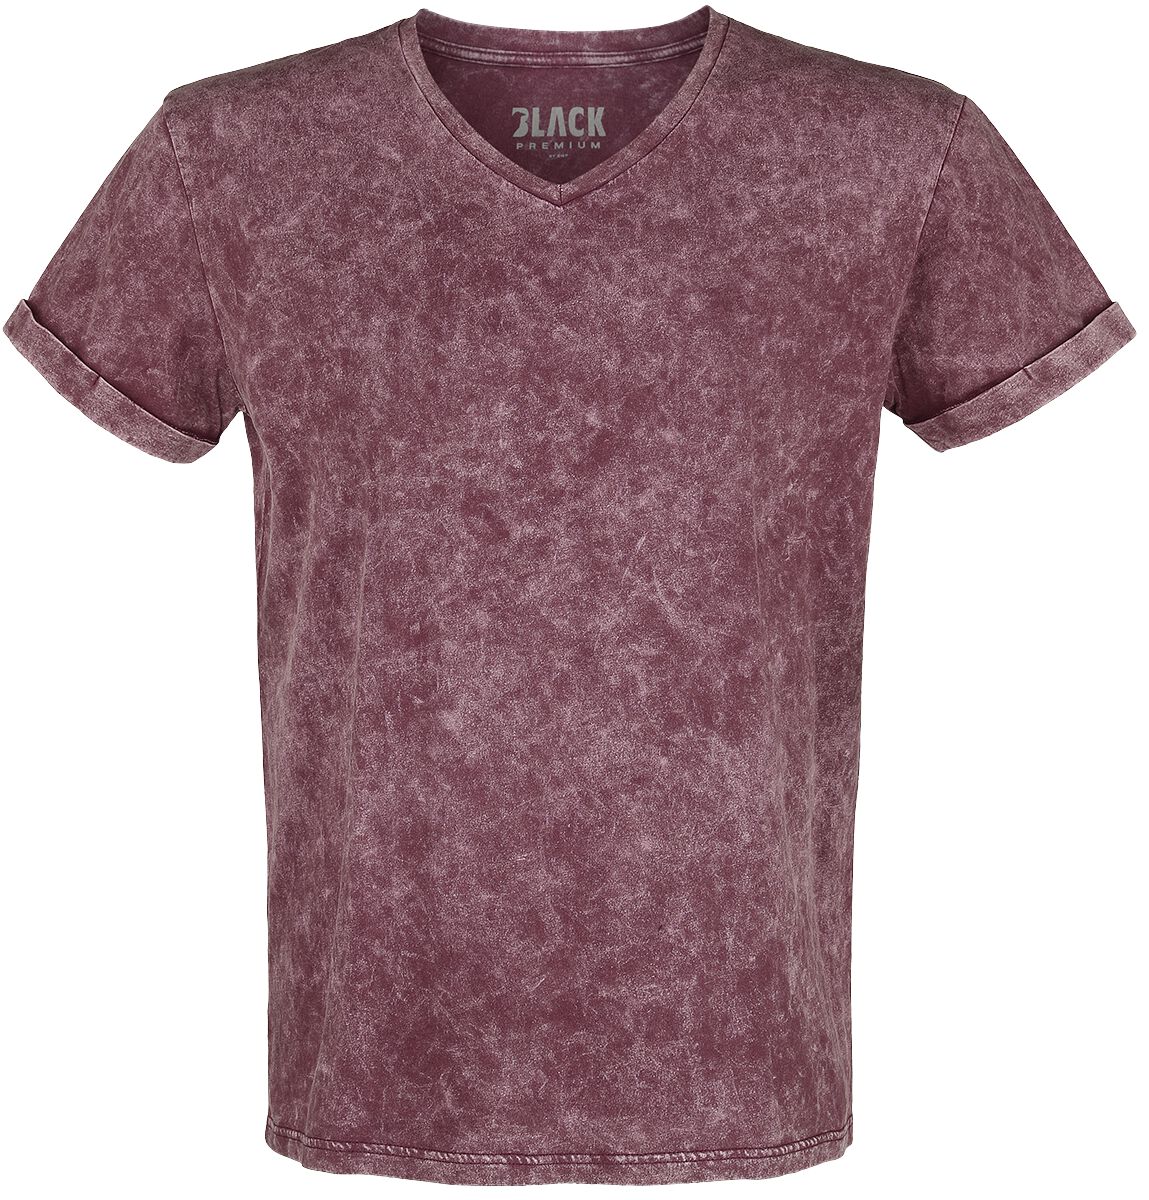 Image of T-Shirt di Black Premium by EMP - T-shirt with Wash - S a 5XL - Uomo - bordeaux